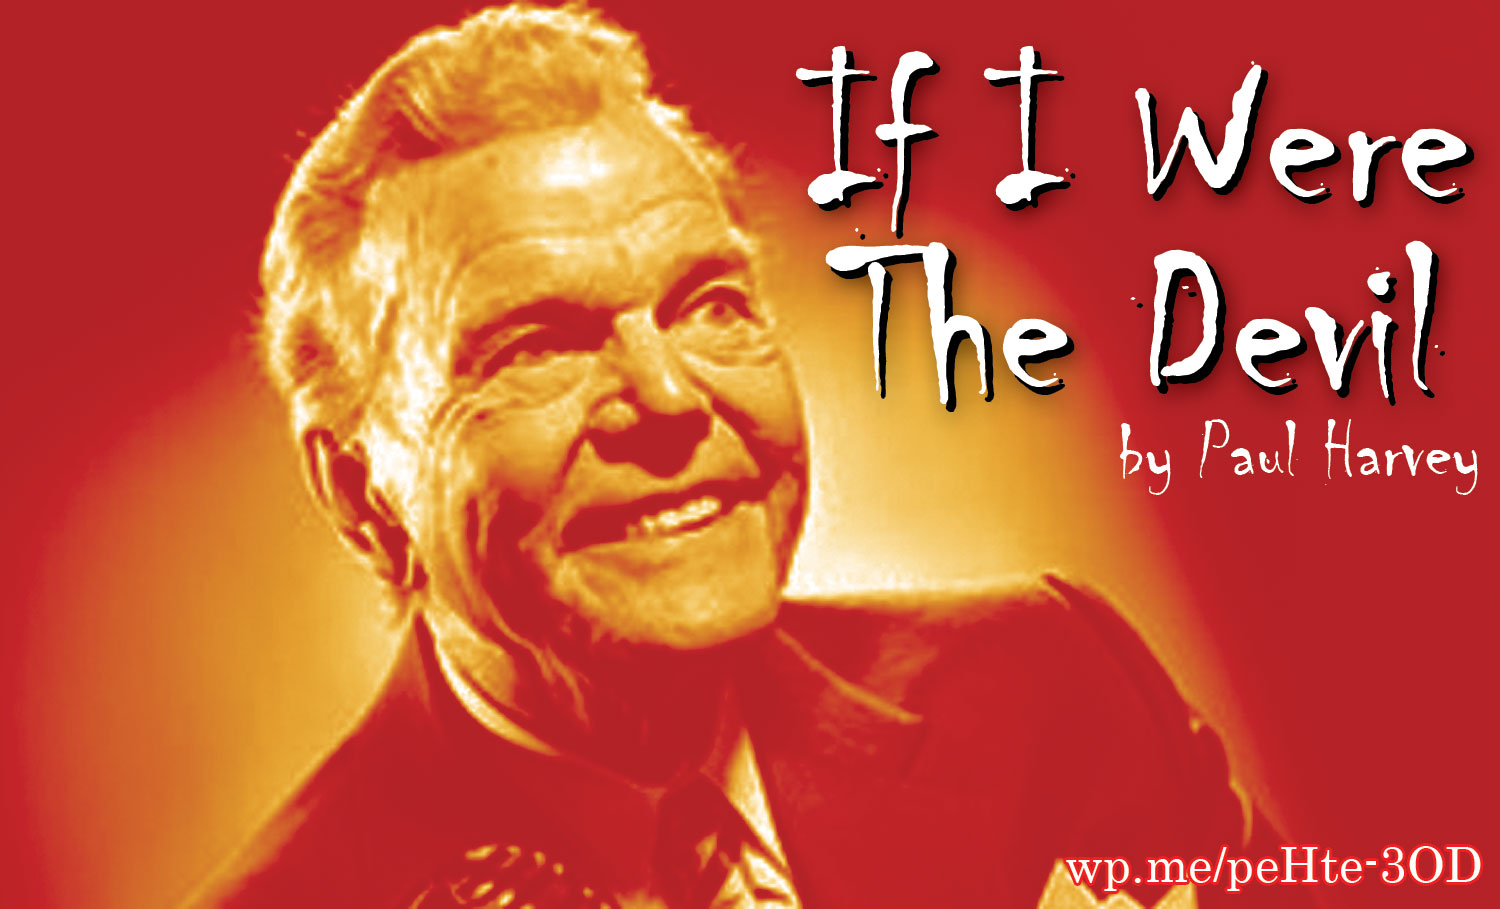 If I Were the Devil by Paul Harvey - a new commentary from Paul Harvey about what it would be like if he was the devil. His comment was true then and still true today! It sounds as if it came out in the news today!